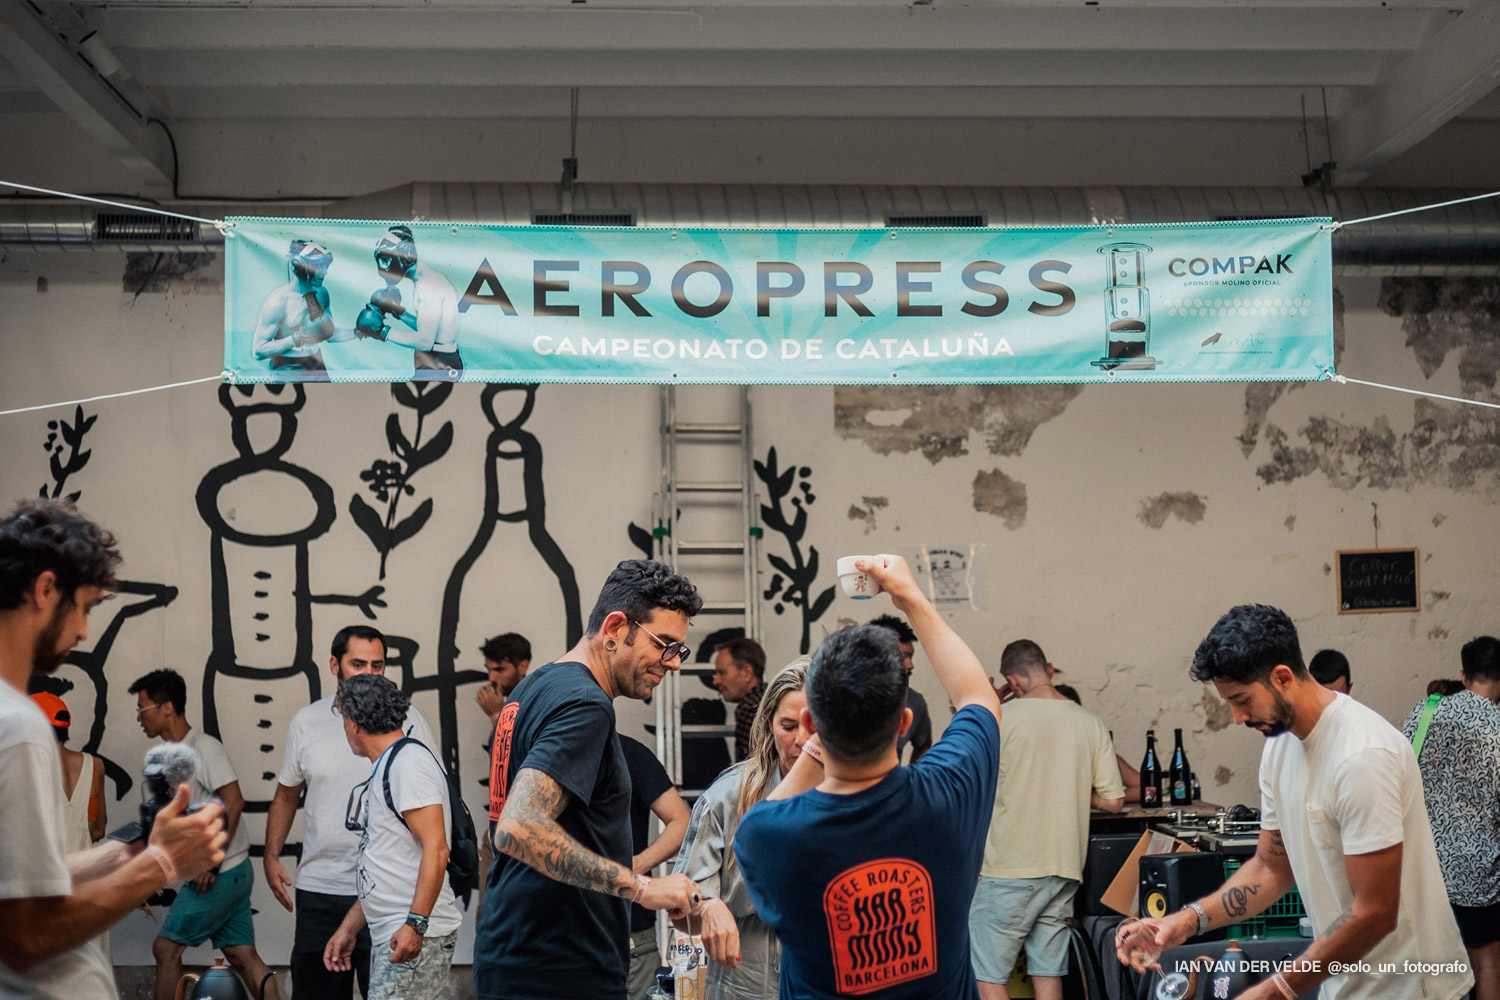 COMPAK. Sponsor of the Official Grinder for the AeroPress Championship of Catalonia 2022